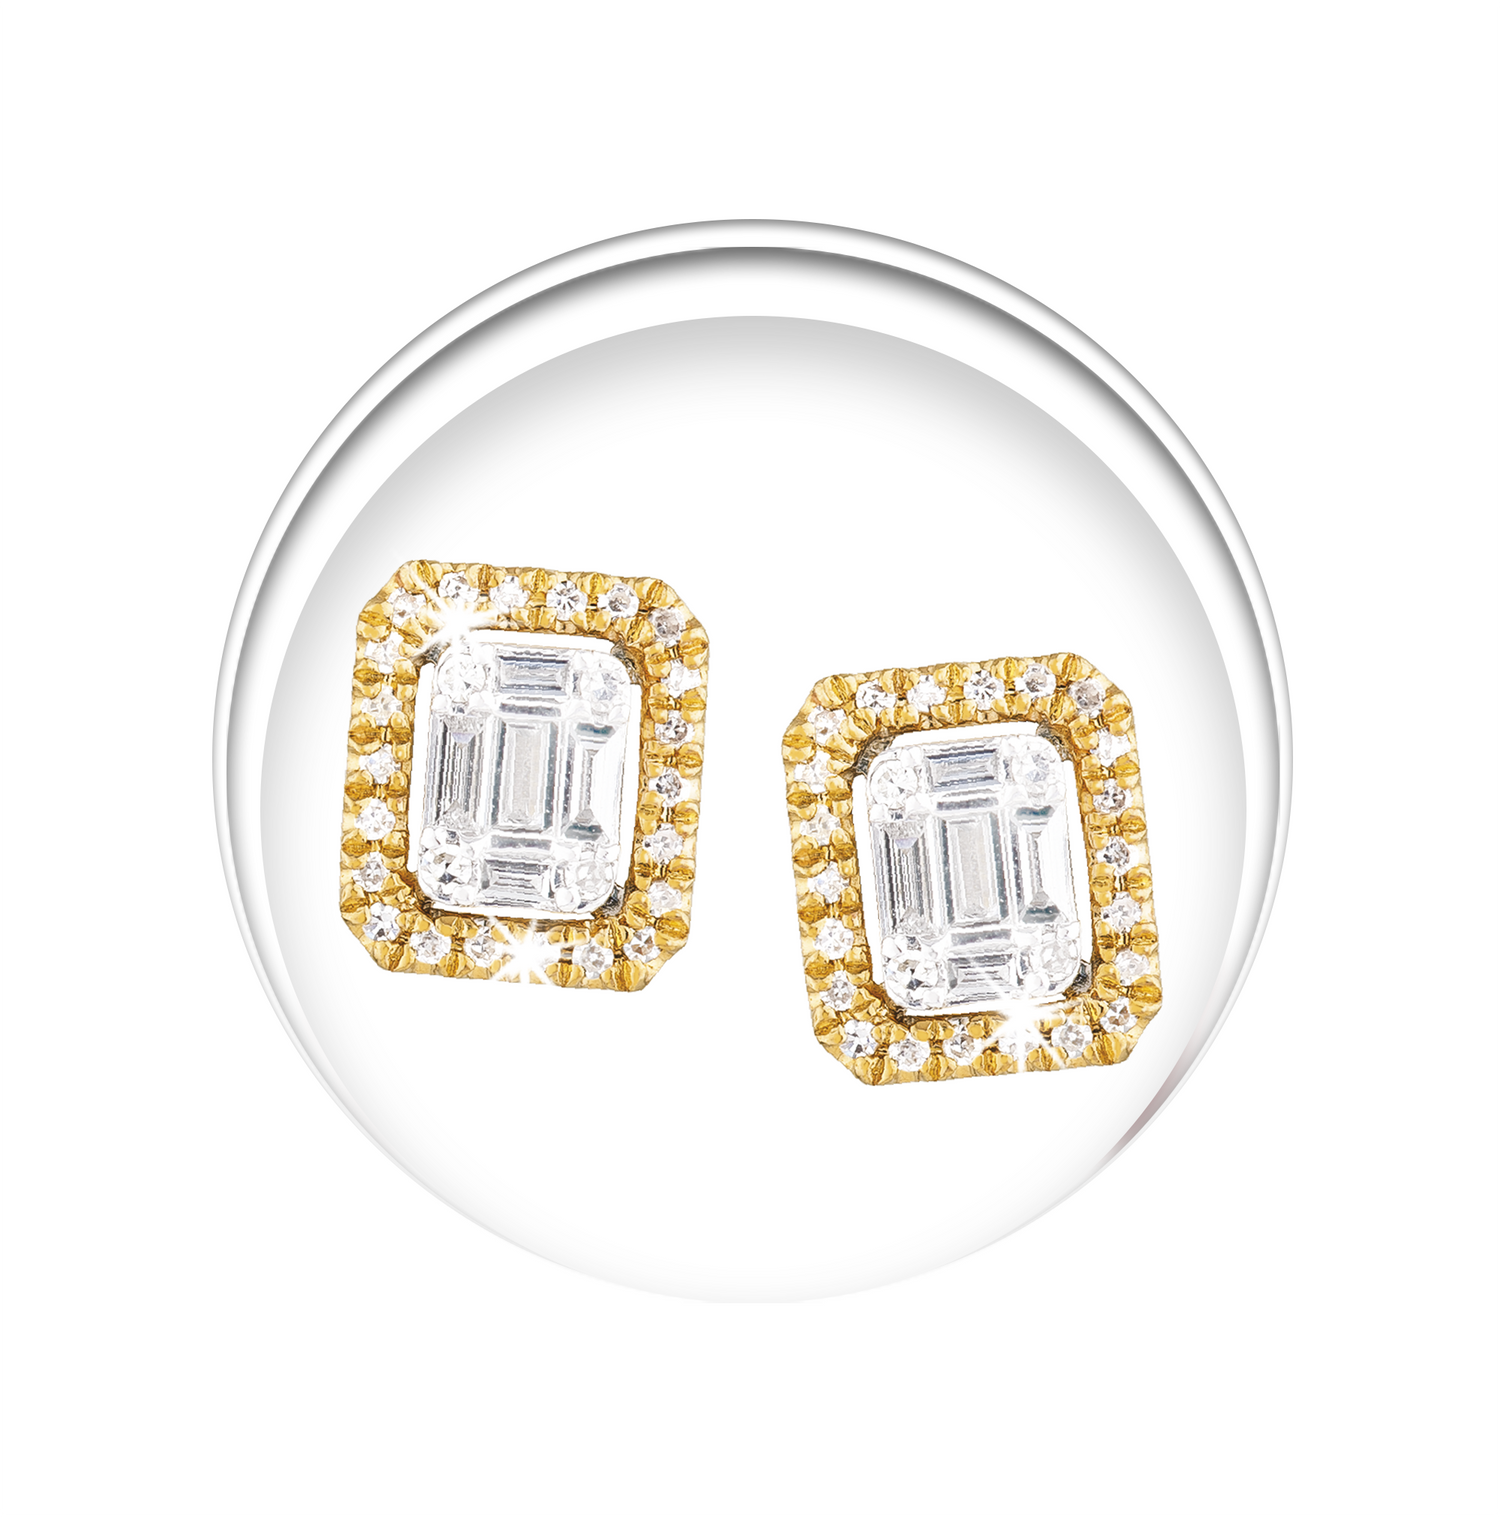 Shop our collection of stunning yellow-gold earrings for ladies. From classic studs to trendy hoops, our selection offers a variety of styles to suit any taste.